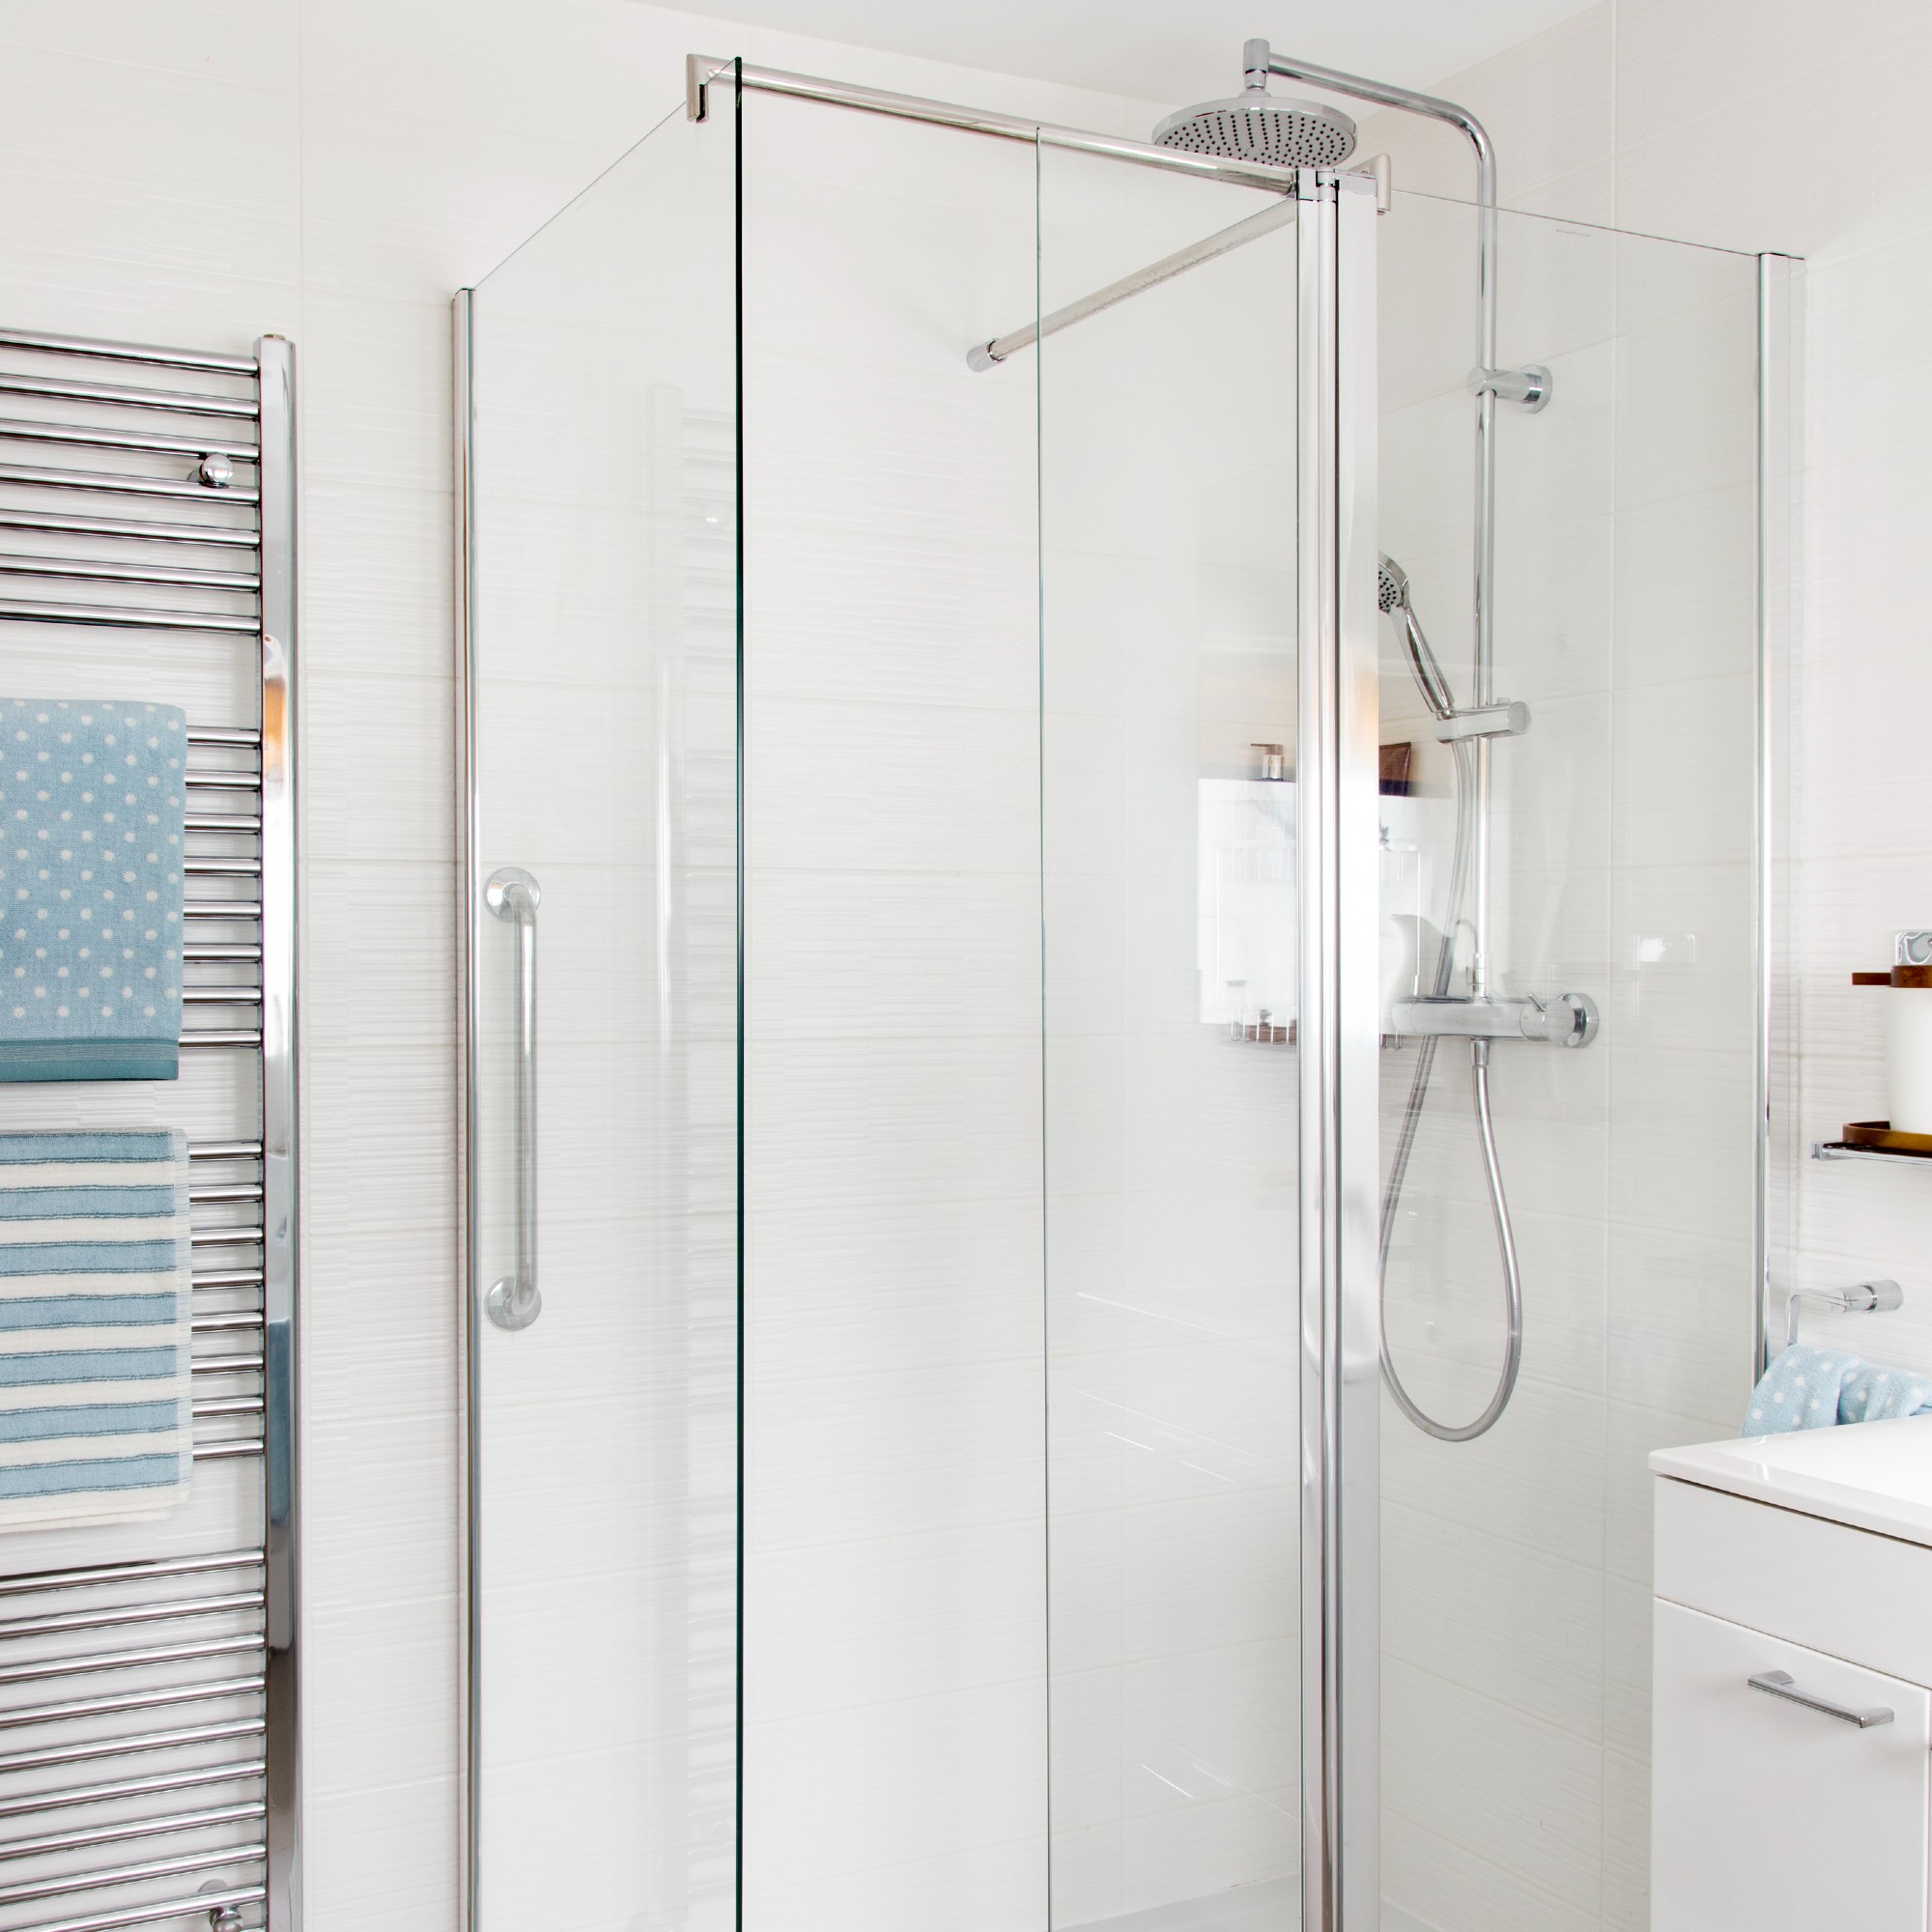 A white bathroom with a shower and glass shower screen